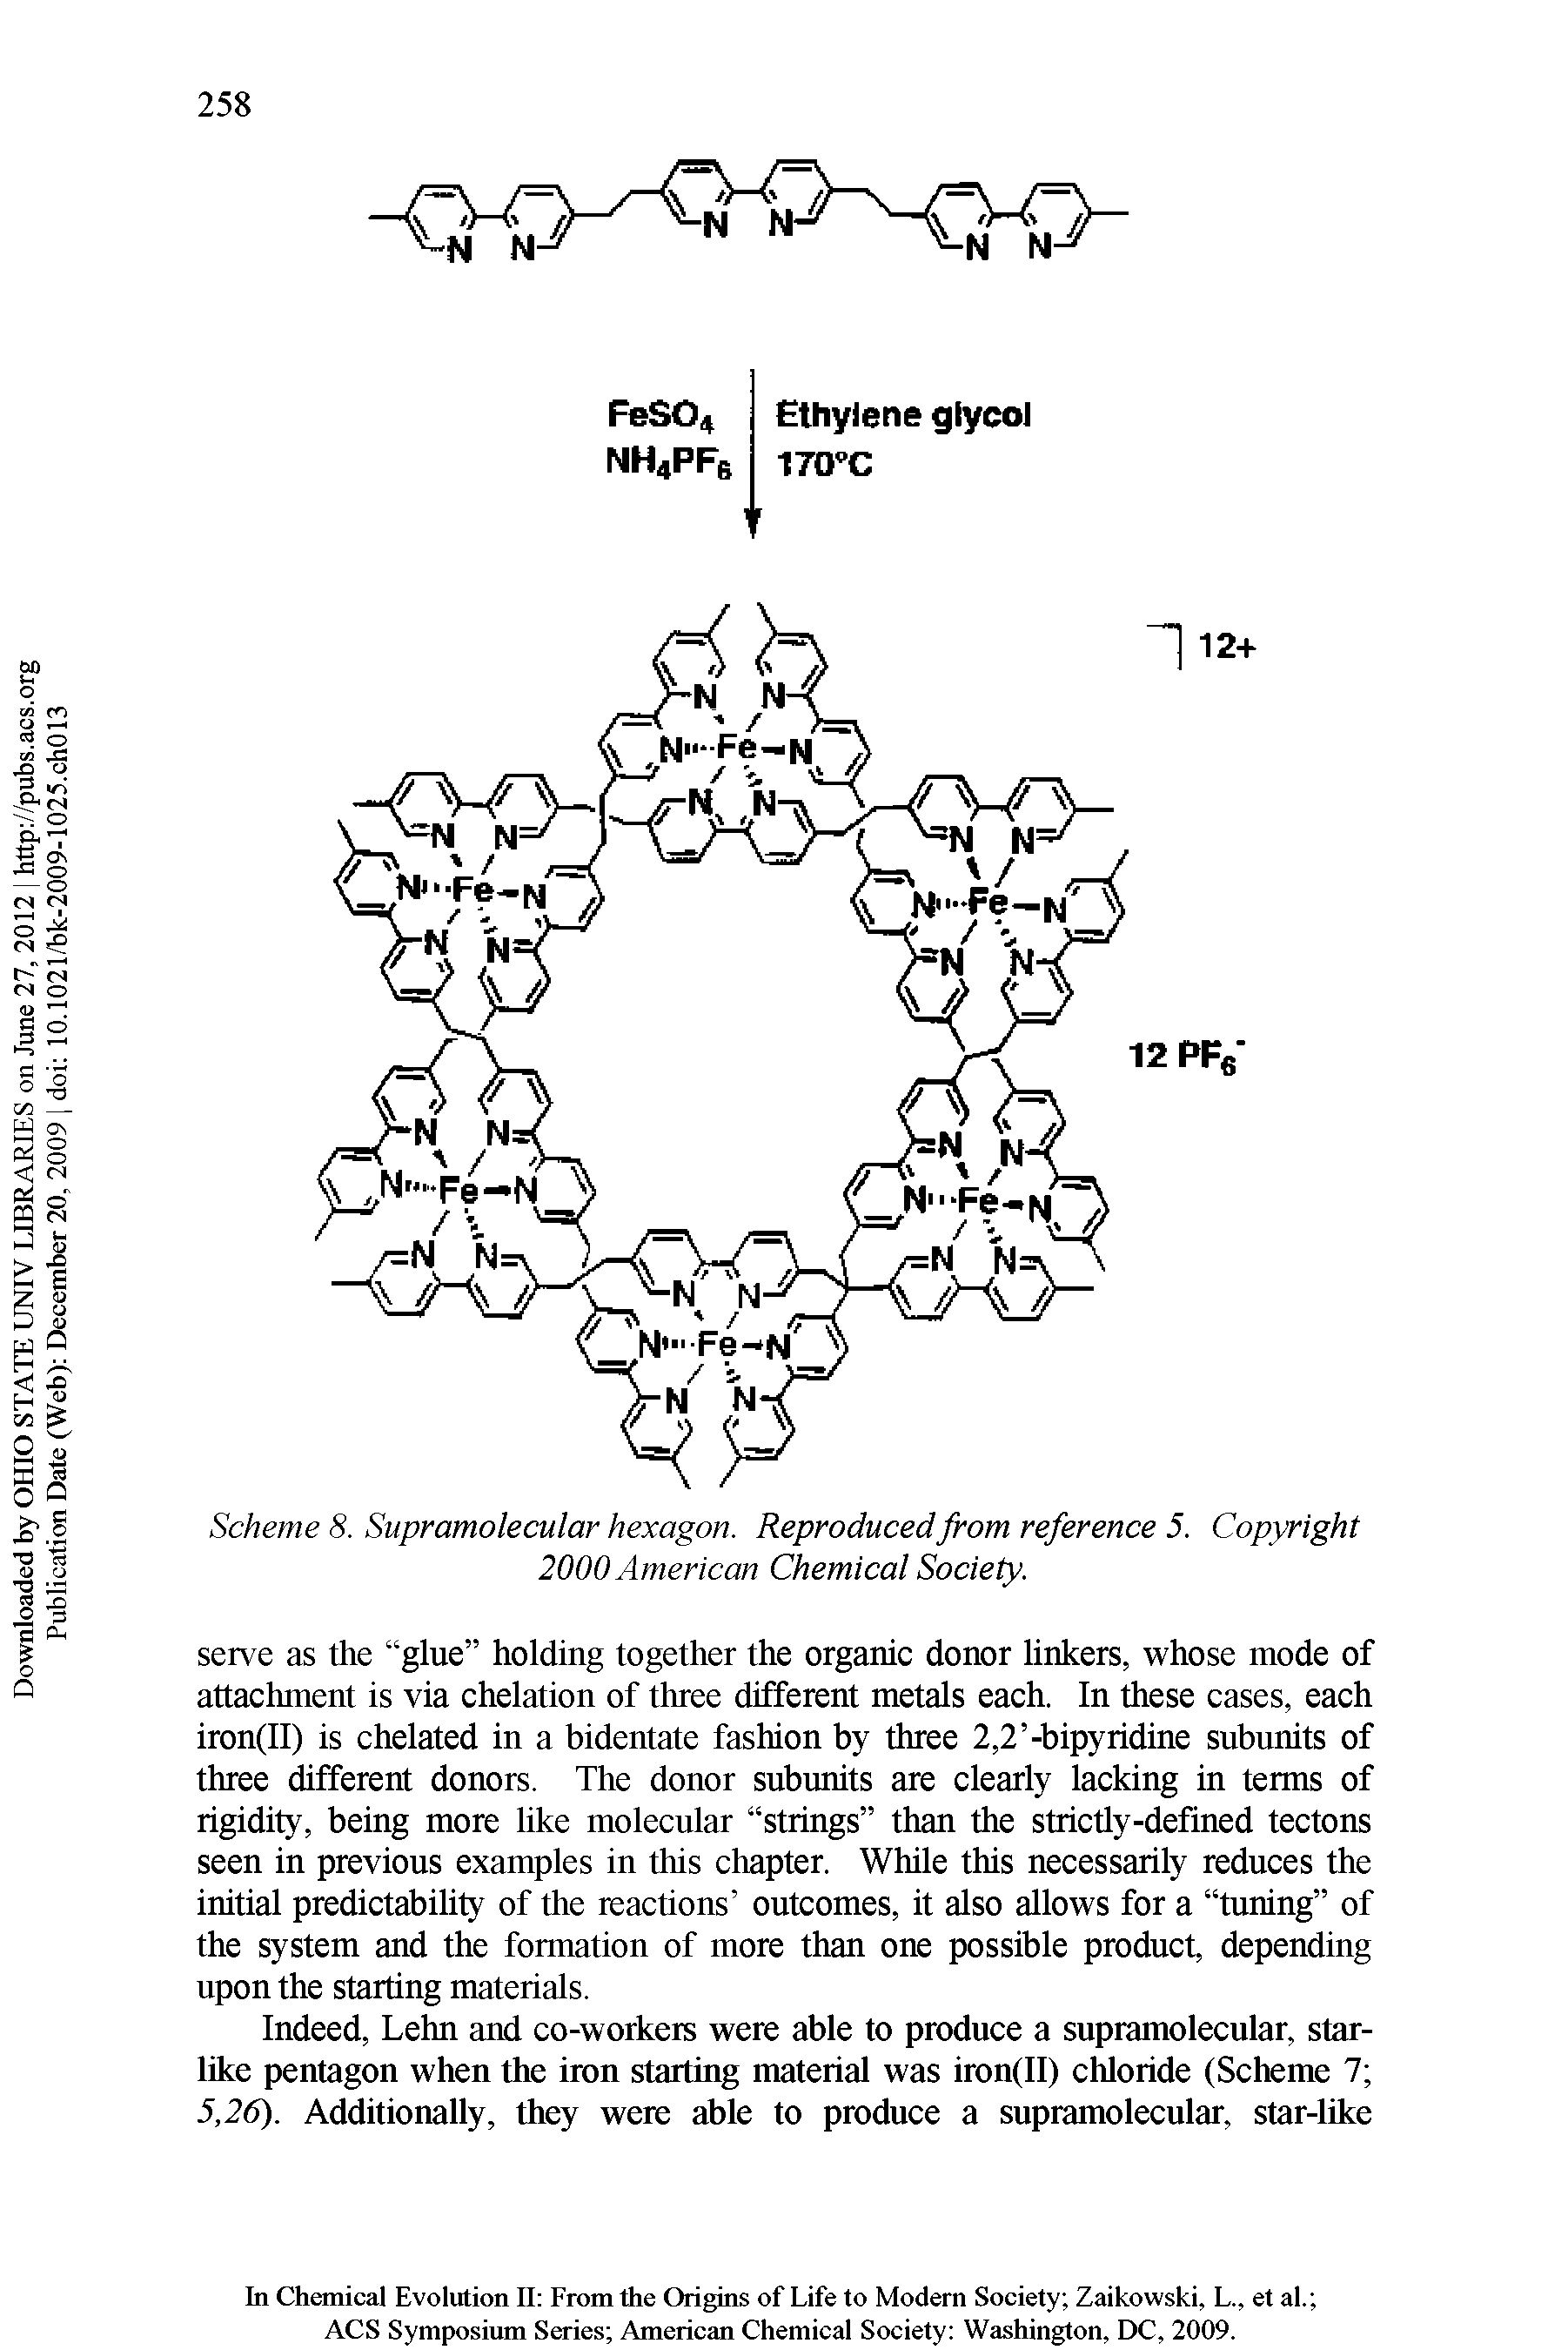 Scheme 8. Supramolecular hexagon. Reproduced from reference 5. Copyright 2000 American Chemical Society.